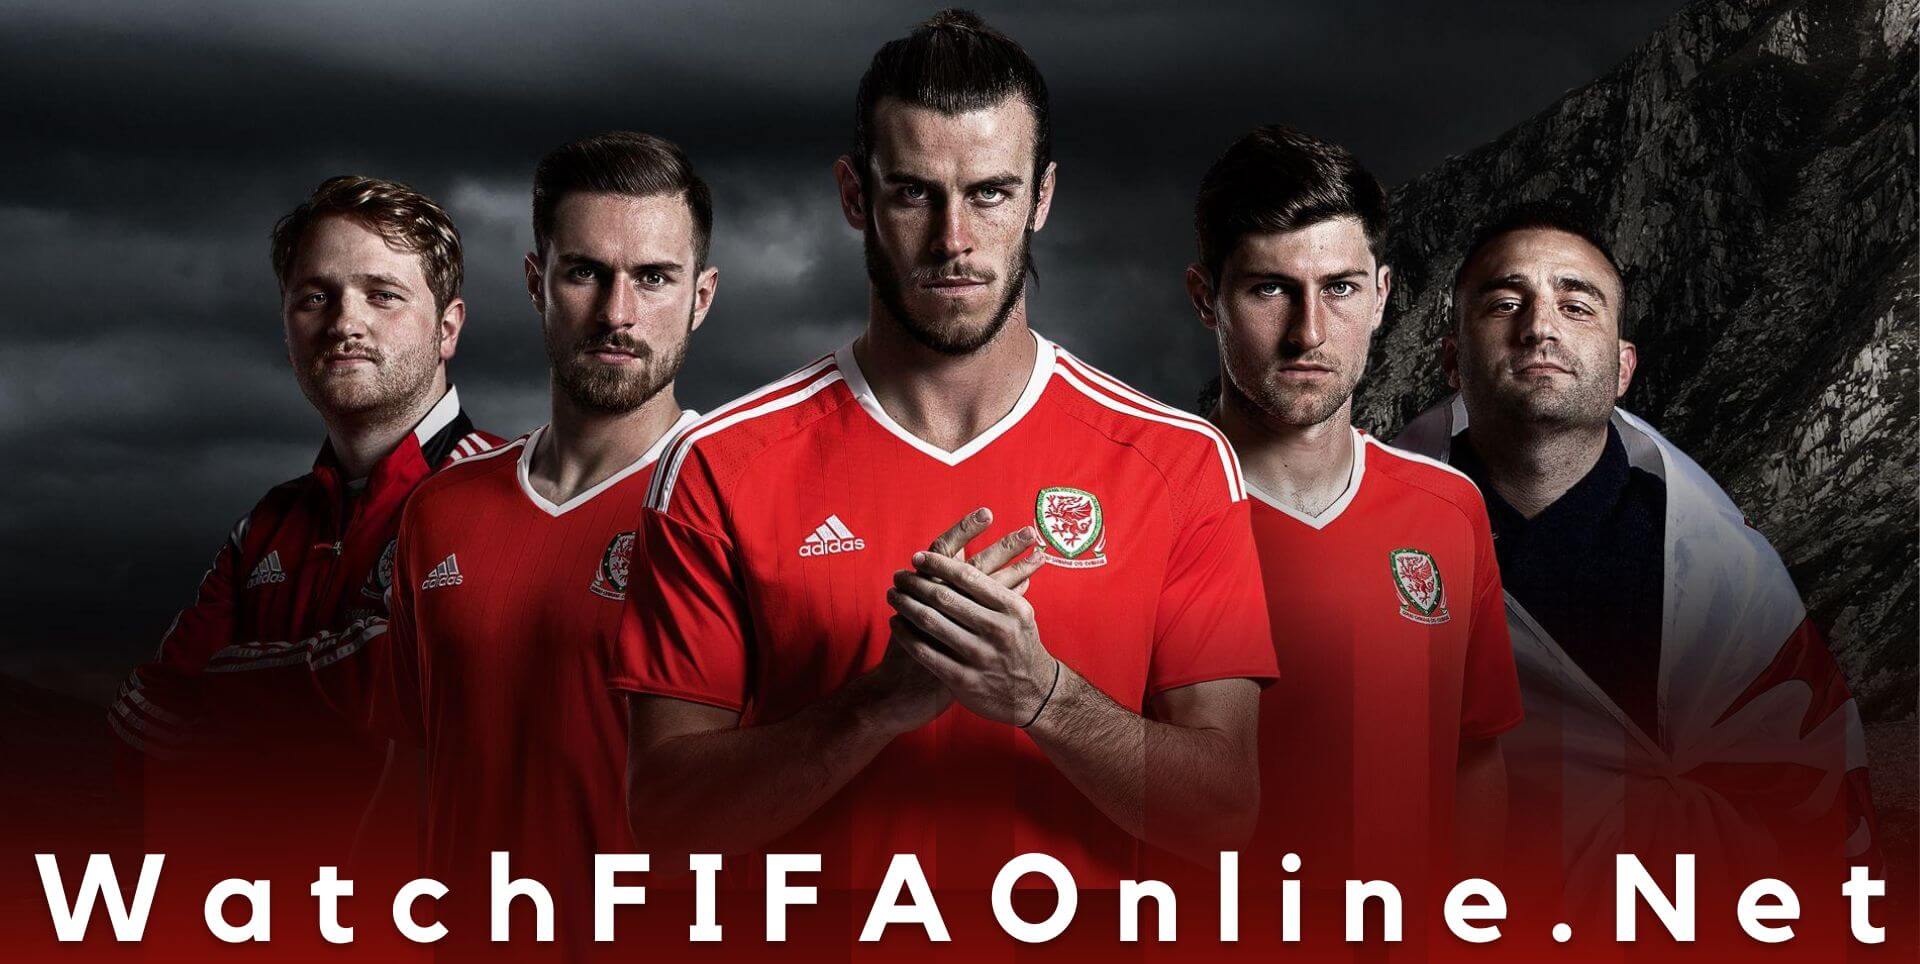 live-stream-wales-team-matches-fifa-world-cup